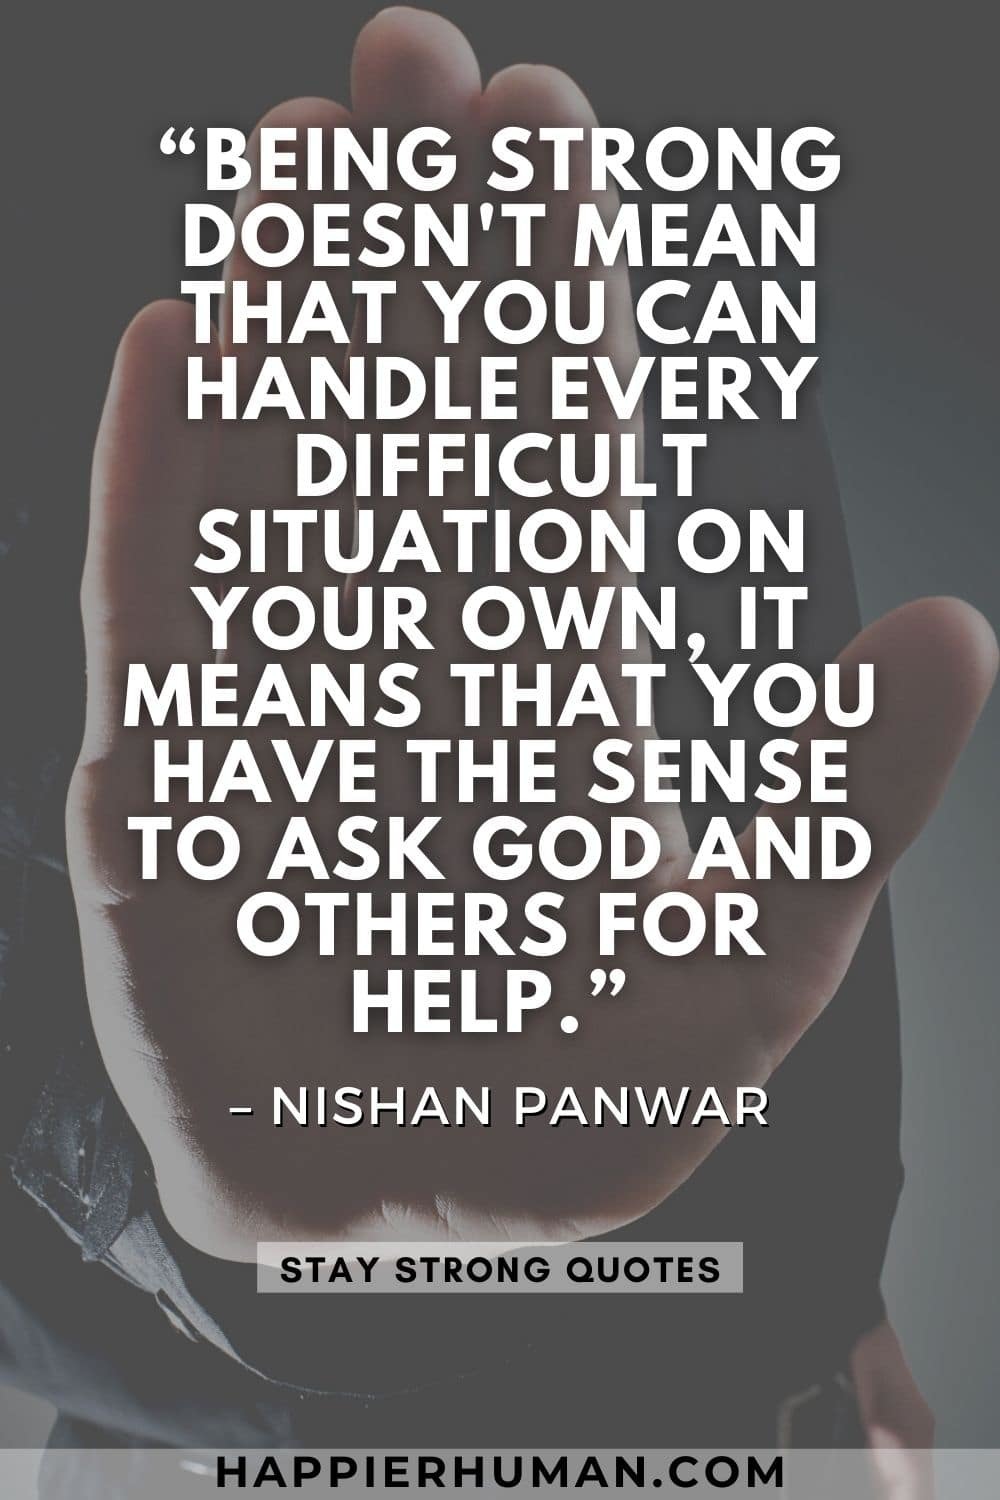 “Being strong doesn't mean that you can handle every difficult situation on your own, it means that you have the sense to ask God and others for help.” – Nishan Panwar | quotes about being strong and happy | gotta stay strong quotes